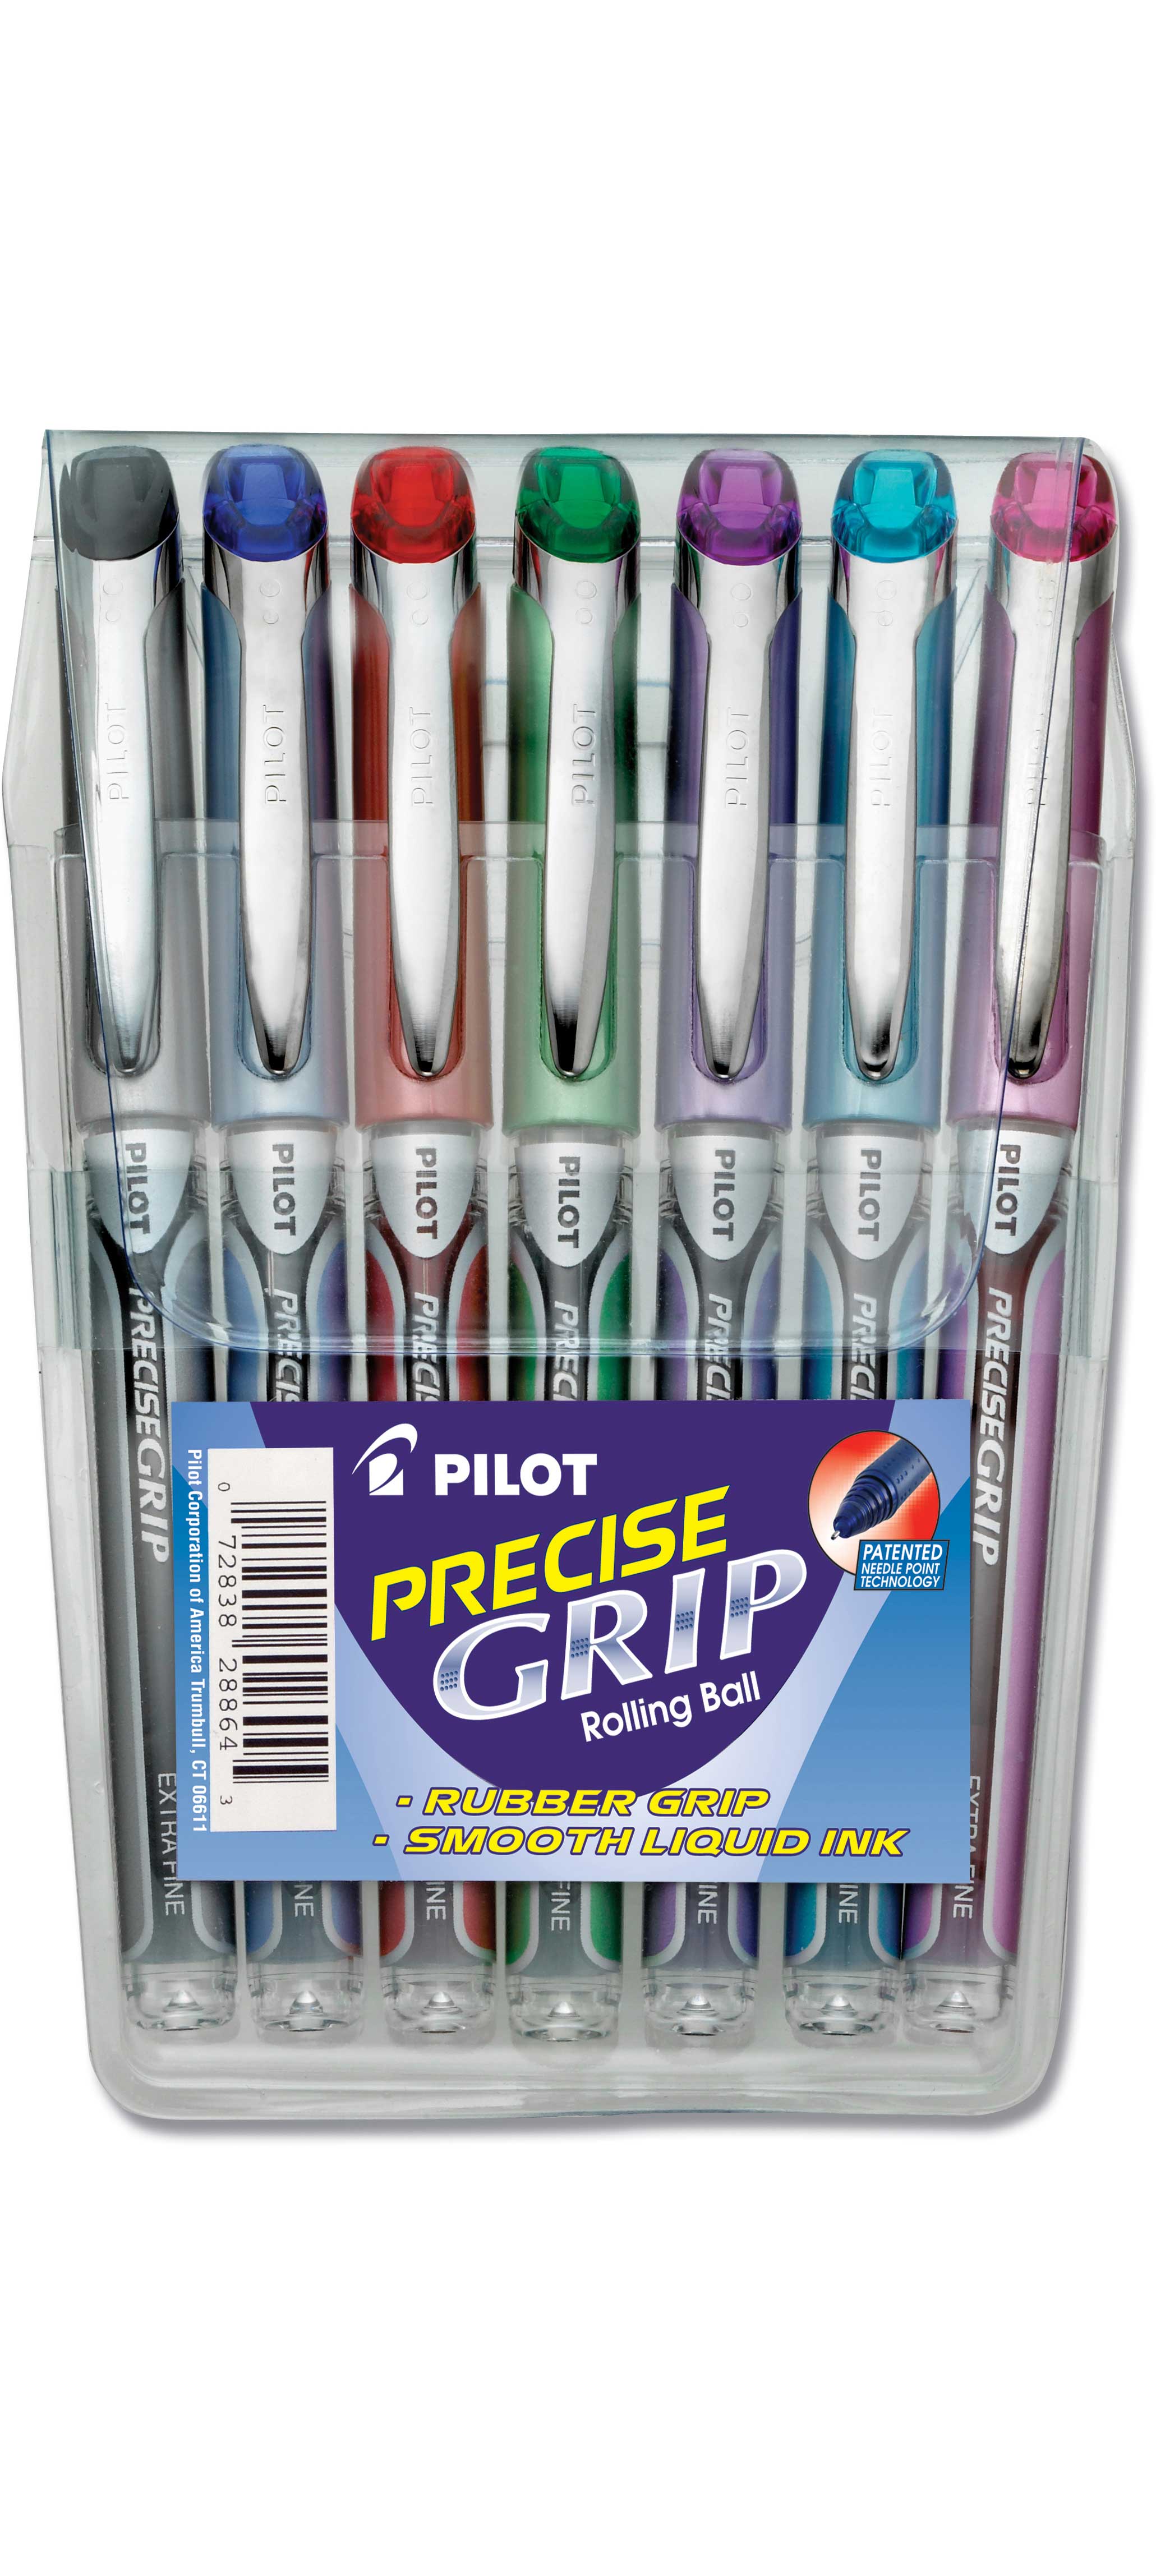 Pilot 28864 Precise Grip Rolling Ball Stick Pens, Extra Fine Point, 7-Pack Assorted Colors